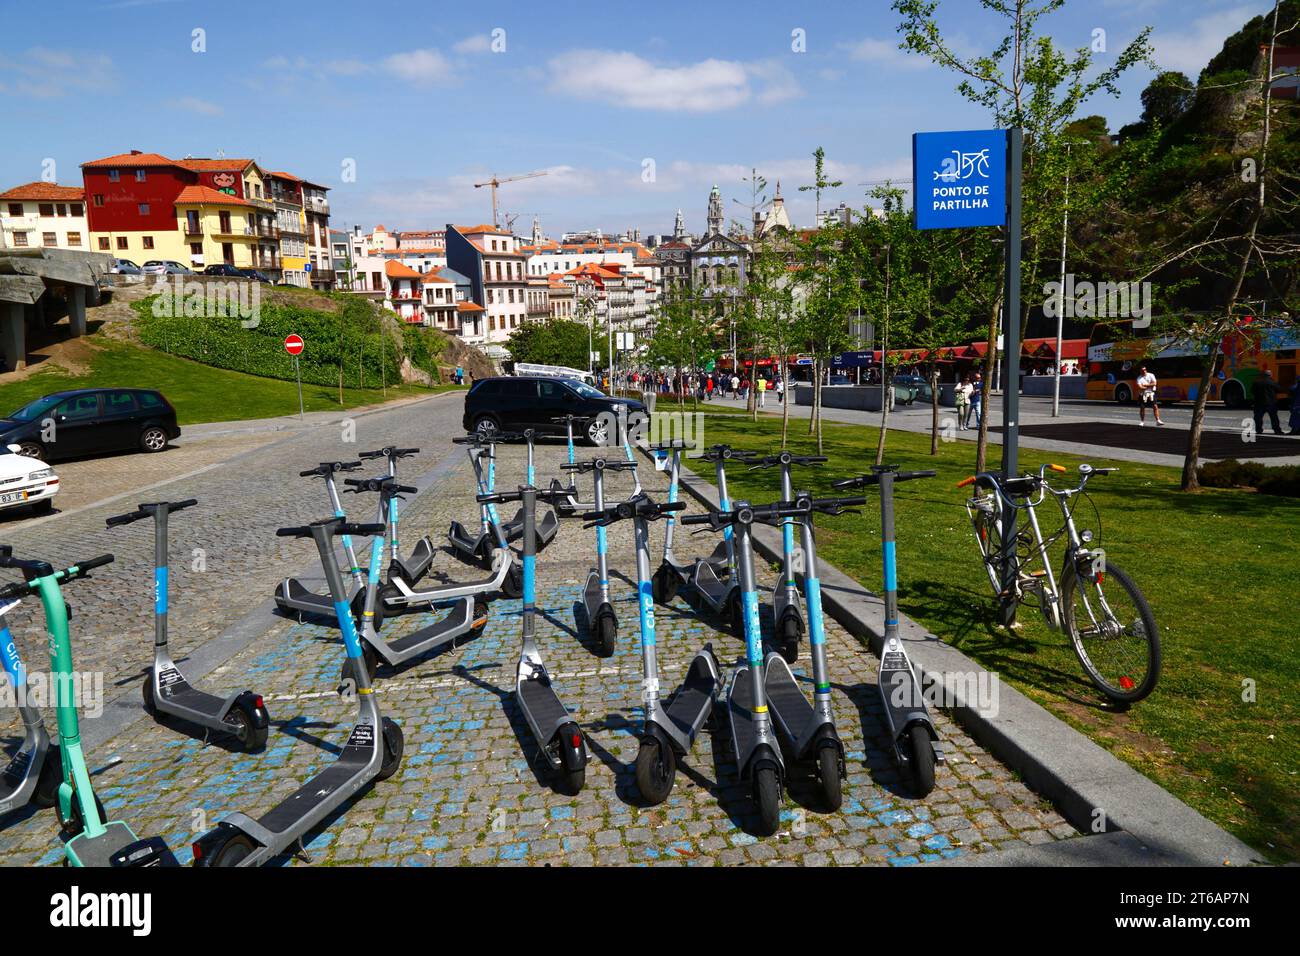 Electric scooters parked at sharing point, Igreja dos Congregados church and city hall tower in distance, Ribeira, Porto / Oporto, Portugal Stock Photo